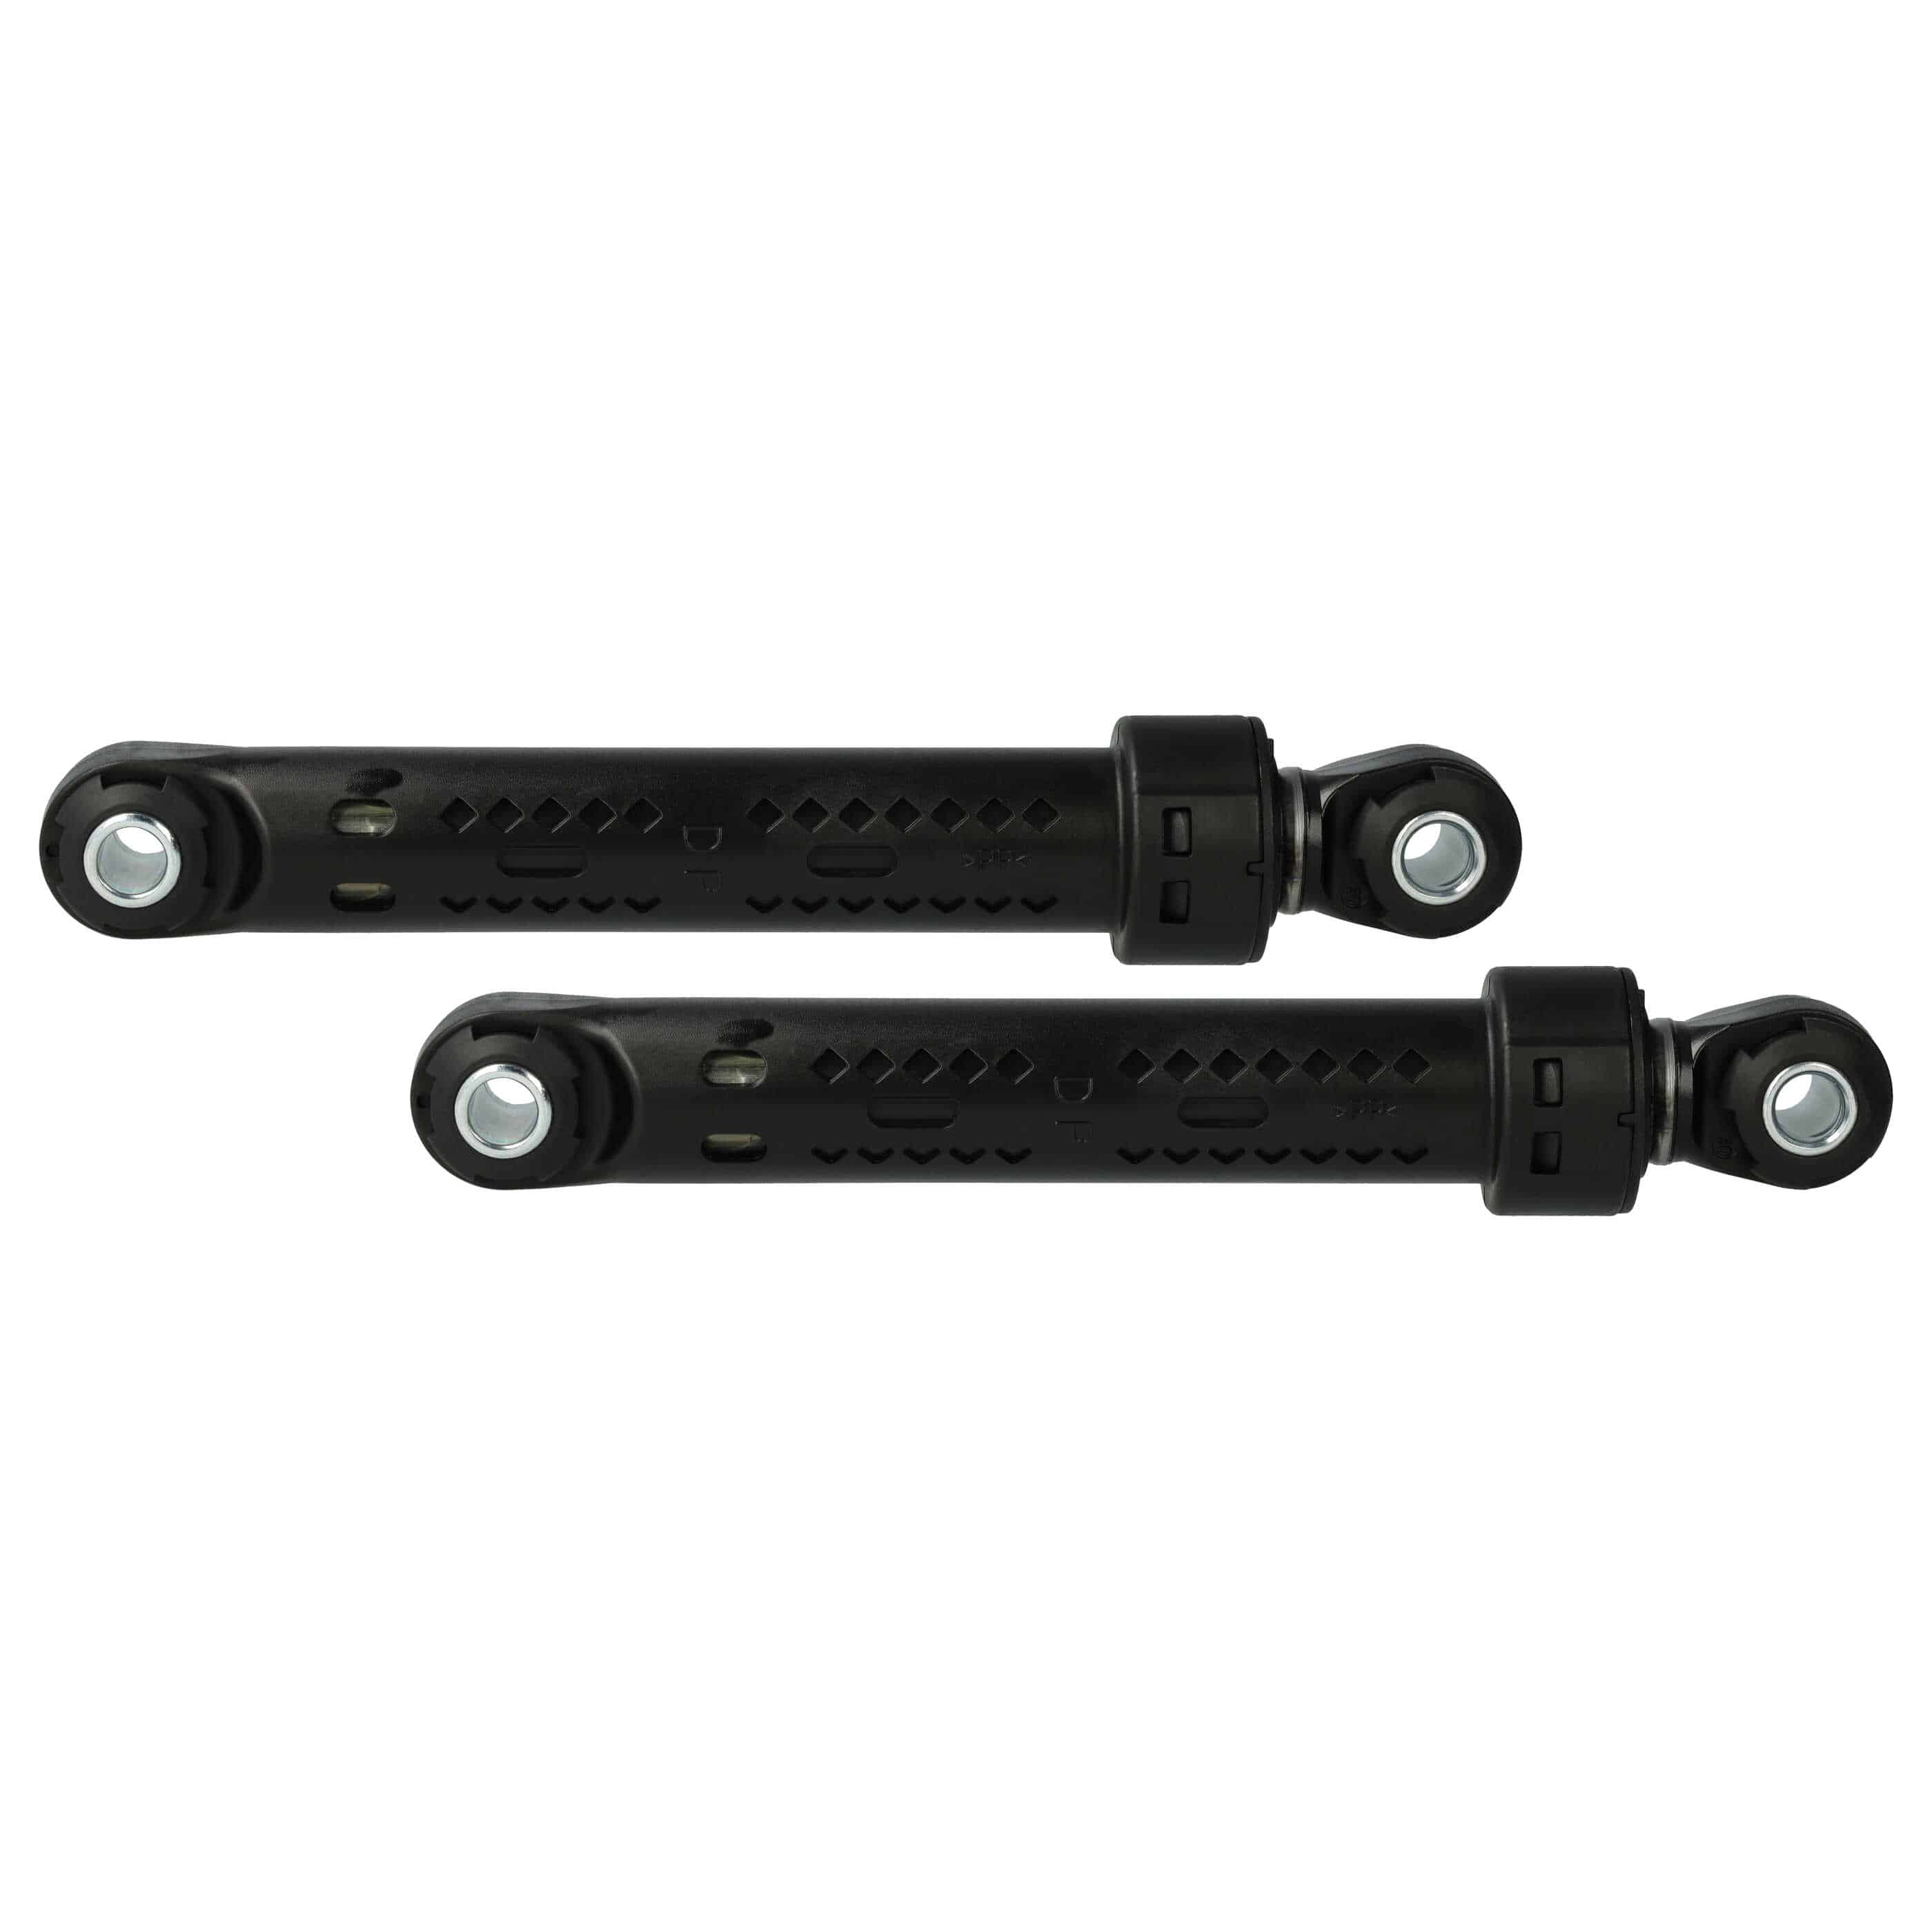 2x Shock Absorber as Replacement for Miele 4500826 for Washing Machine - 120 N